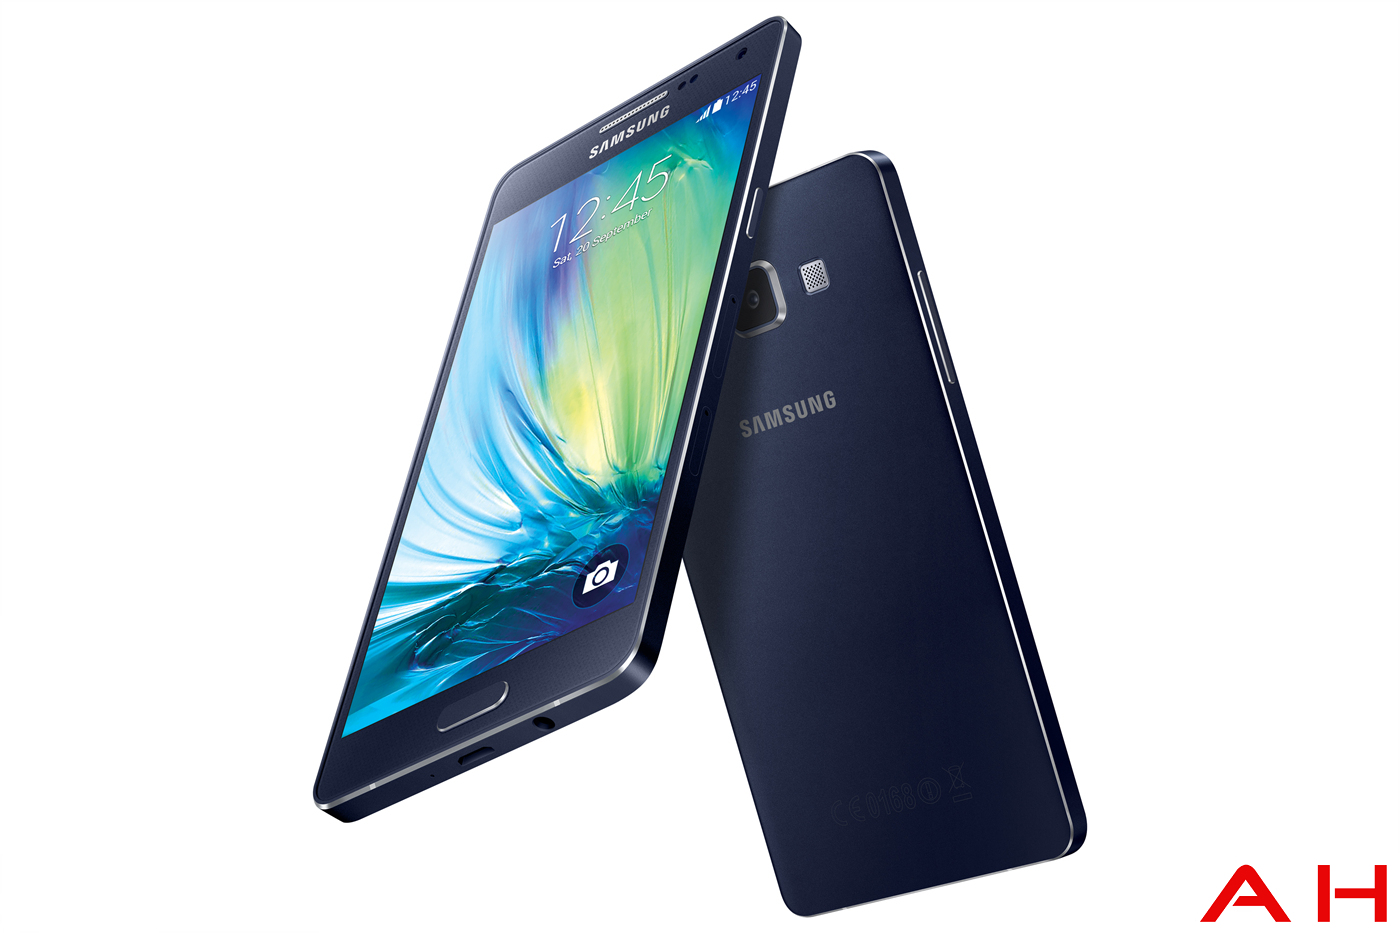 samsung-galaxy-A5-front-and-back-angled.jpg